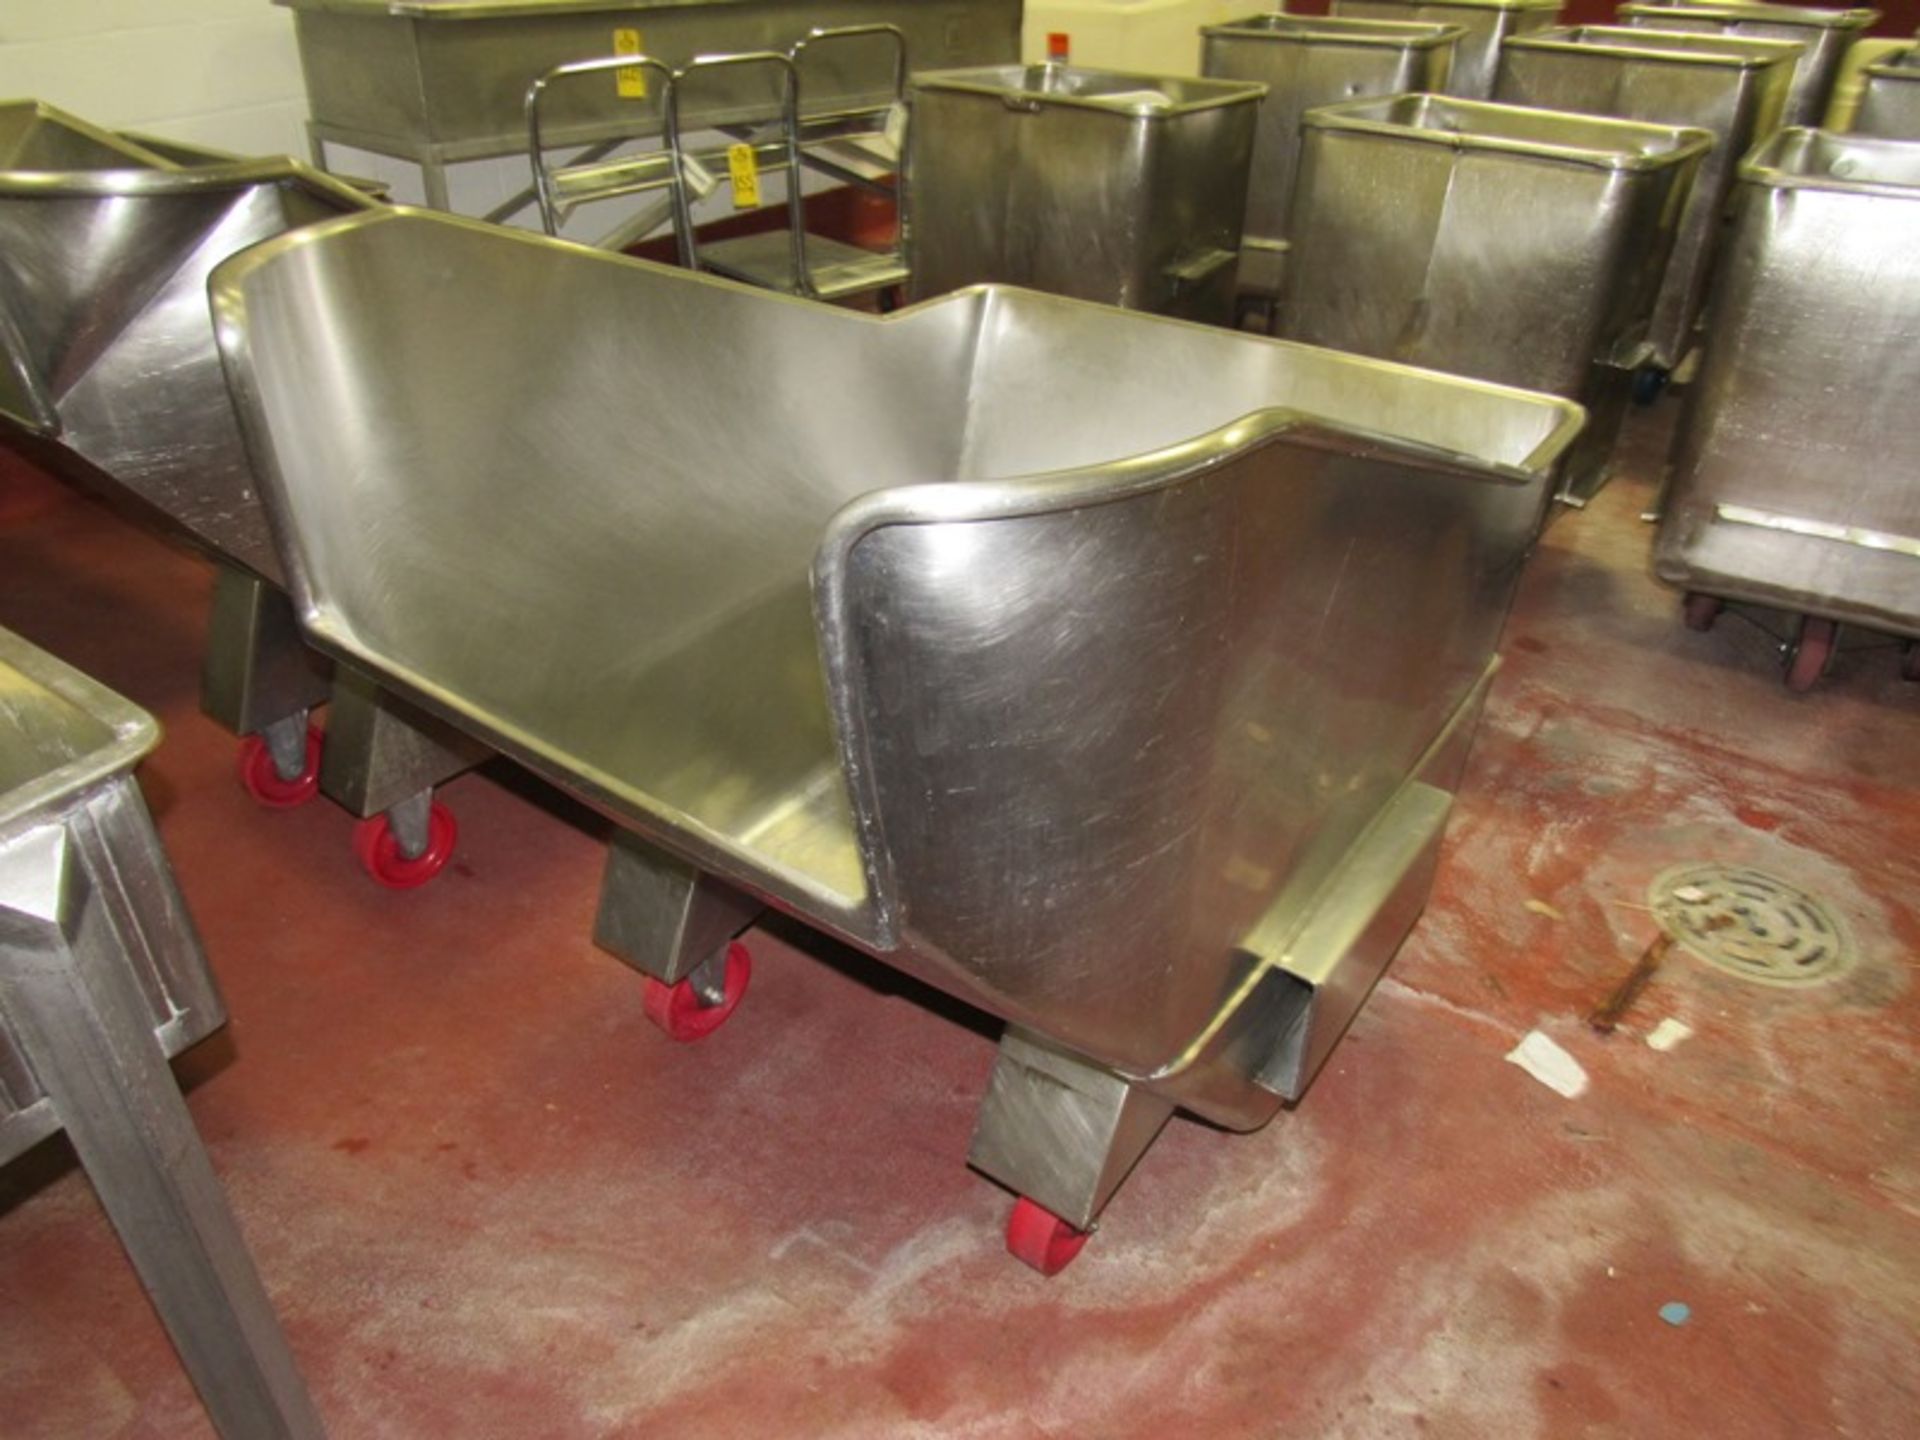 Bowl Cutter Lift Carts (Required Loading Fee $20.00 Norm Pavlish 402-540-8843 Nebraska Stainless) - Image 2 of 3